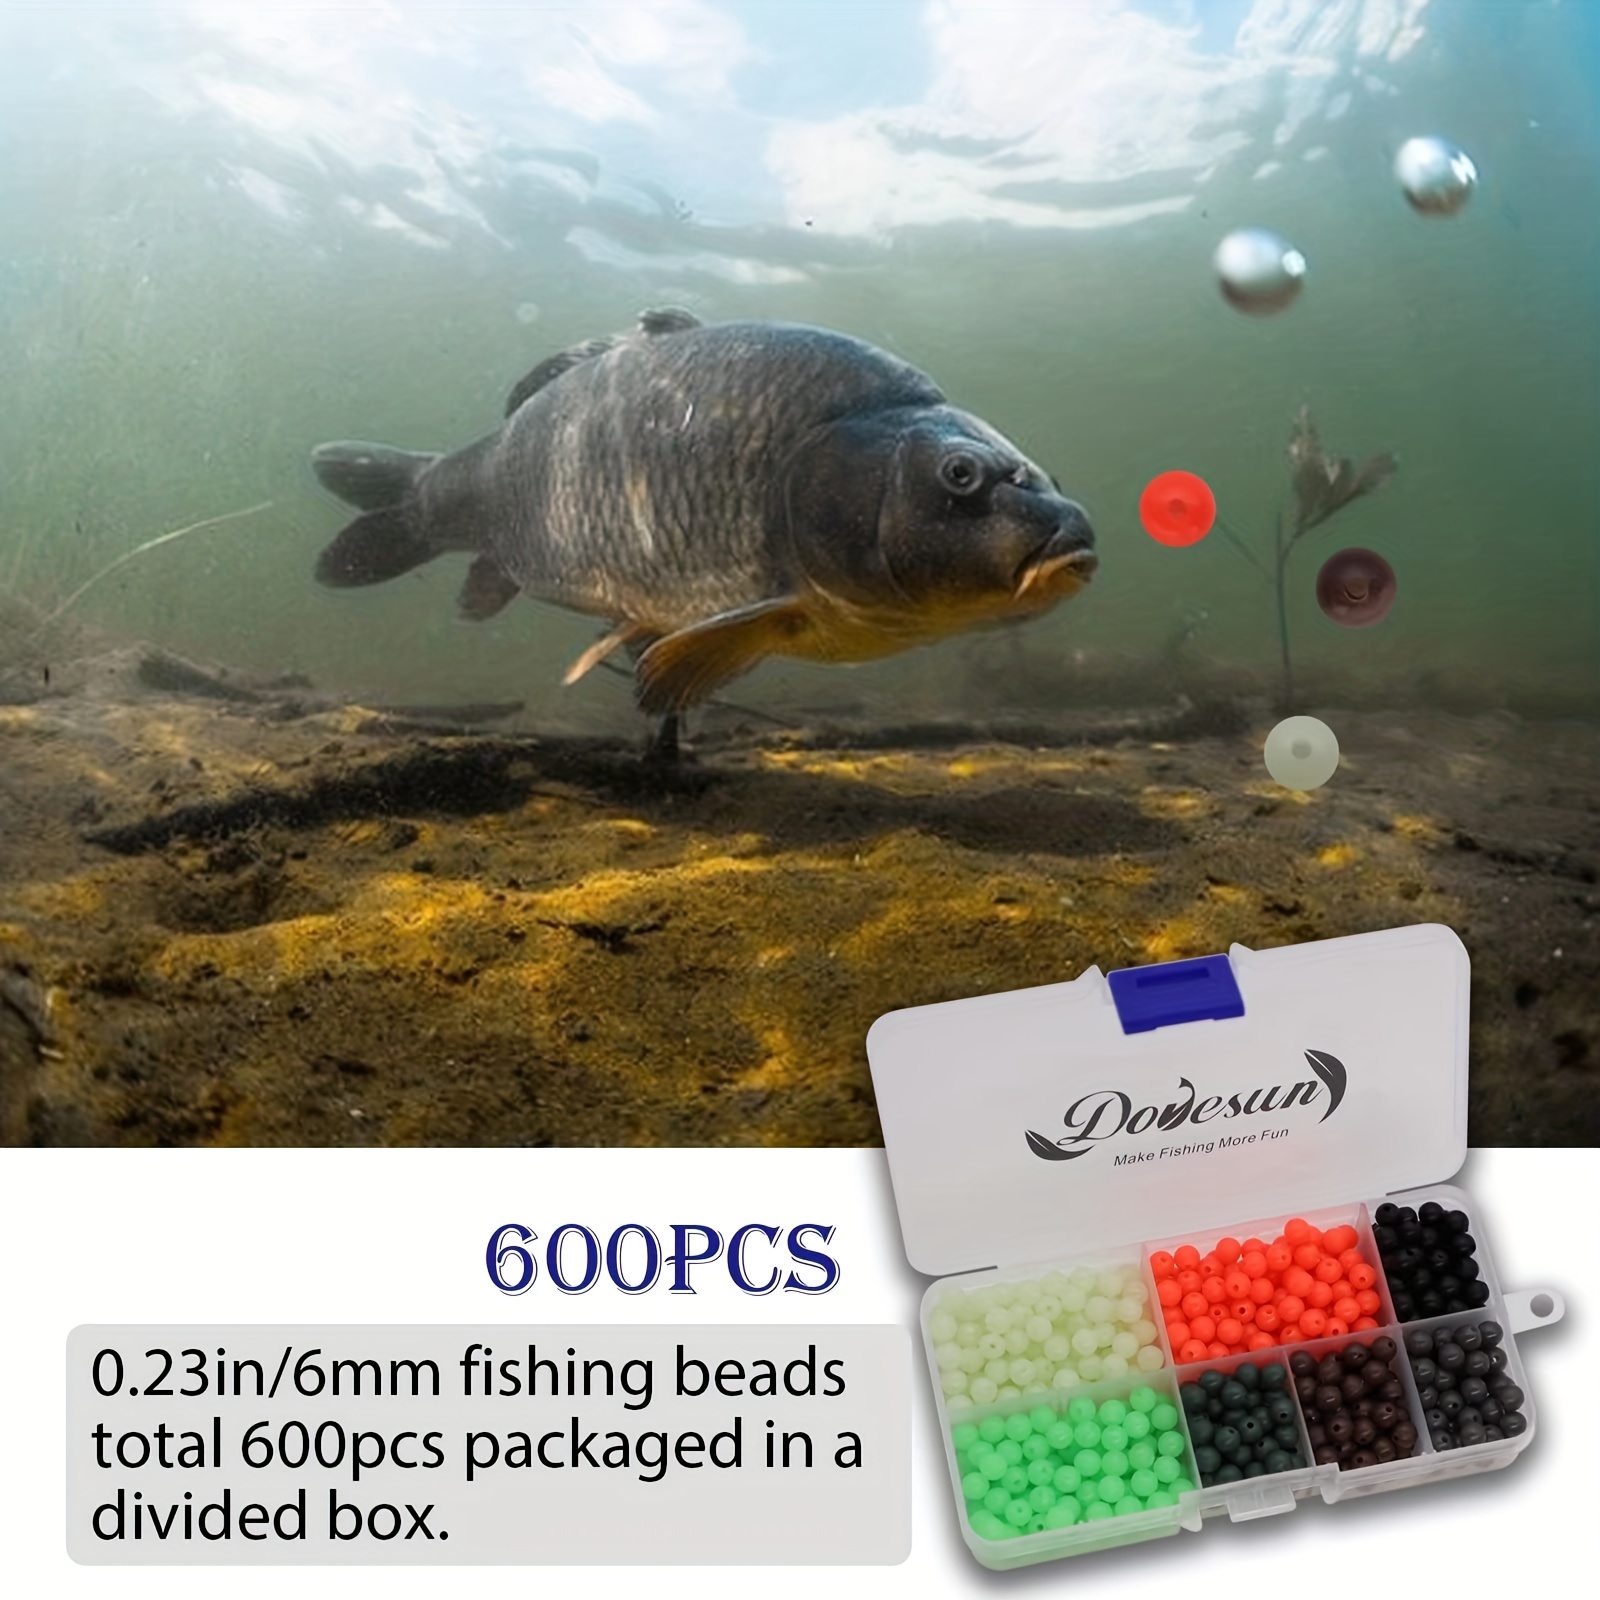 Dovesun Soft Rubber Fishing Beads Fishing Accessories 7 Colors Round  Fishing Beads with Fishing Tackle Box 0.23in(600pcs), 0.31in(250pcs)